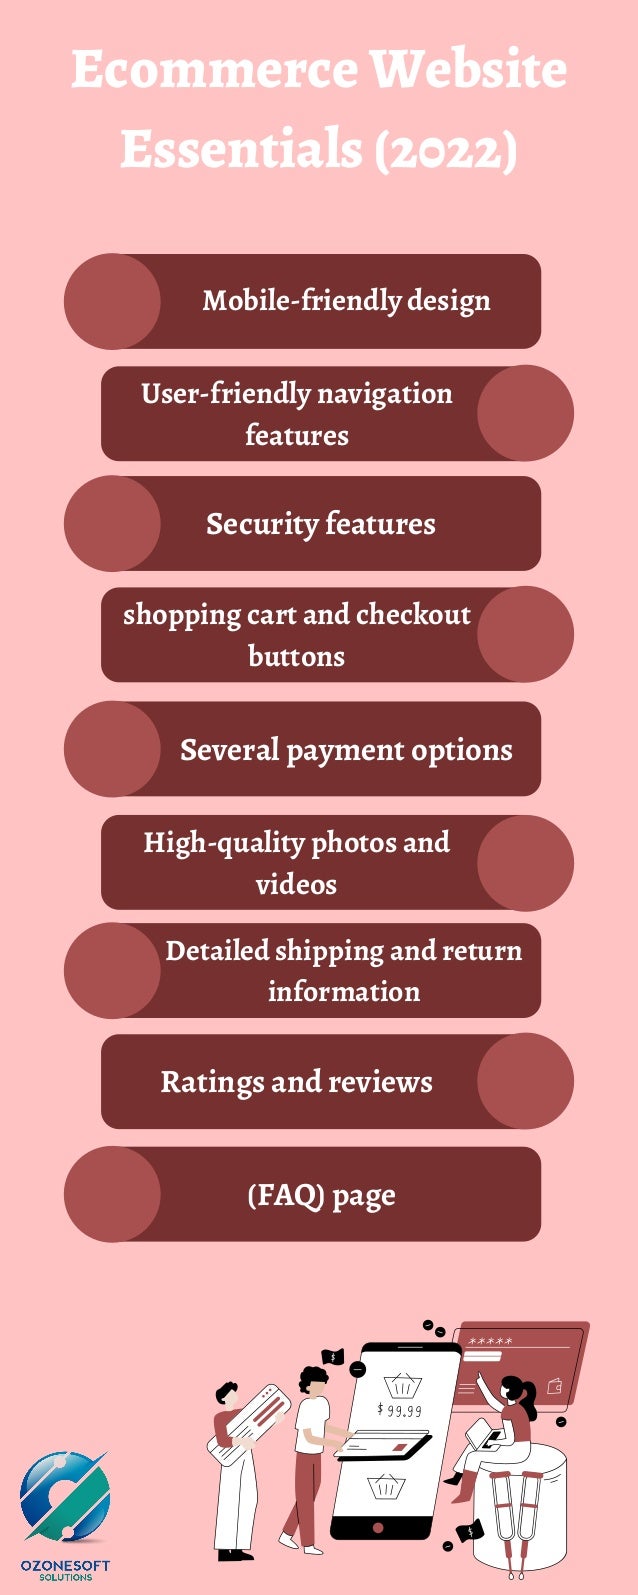 Ecommerce Website
Essentials (2022)
Mobile-friendly design
User-friendly navigation
features
Security features
shopping cart and checkout
buttons
Several payment options
High-quality photos and
videos
Detailed shipping and return
information
Ratings and reviews
(FAQ) page
 